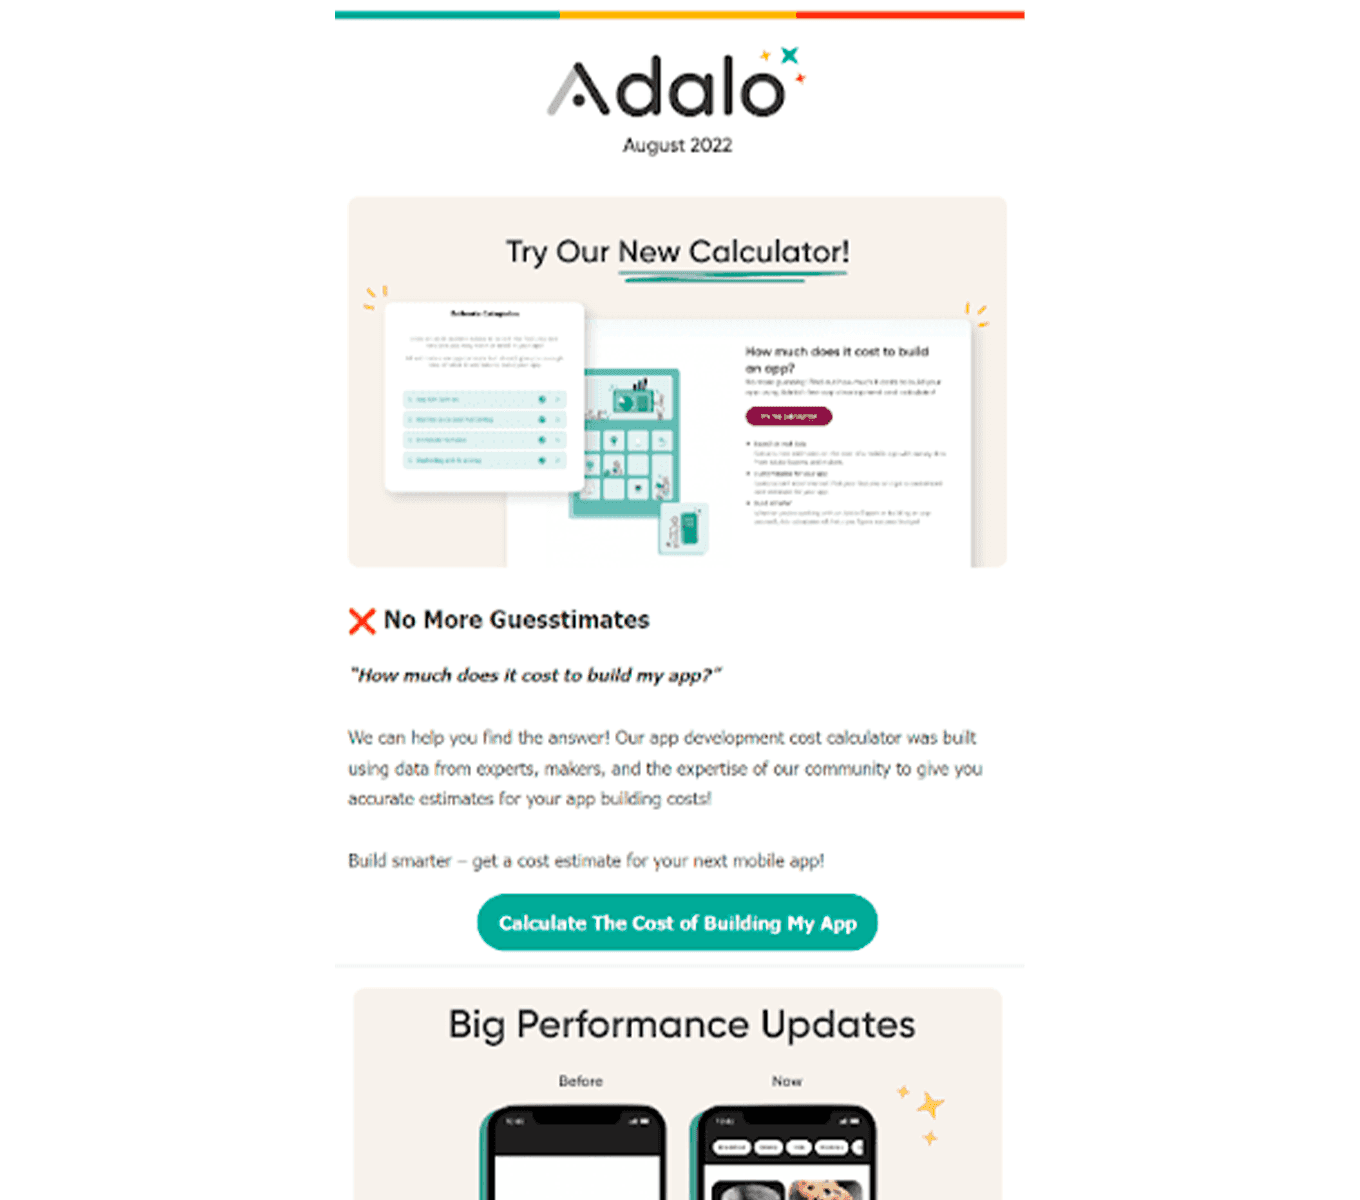 adalo marketing email to show new features